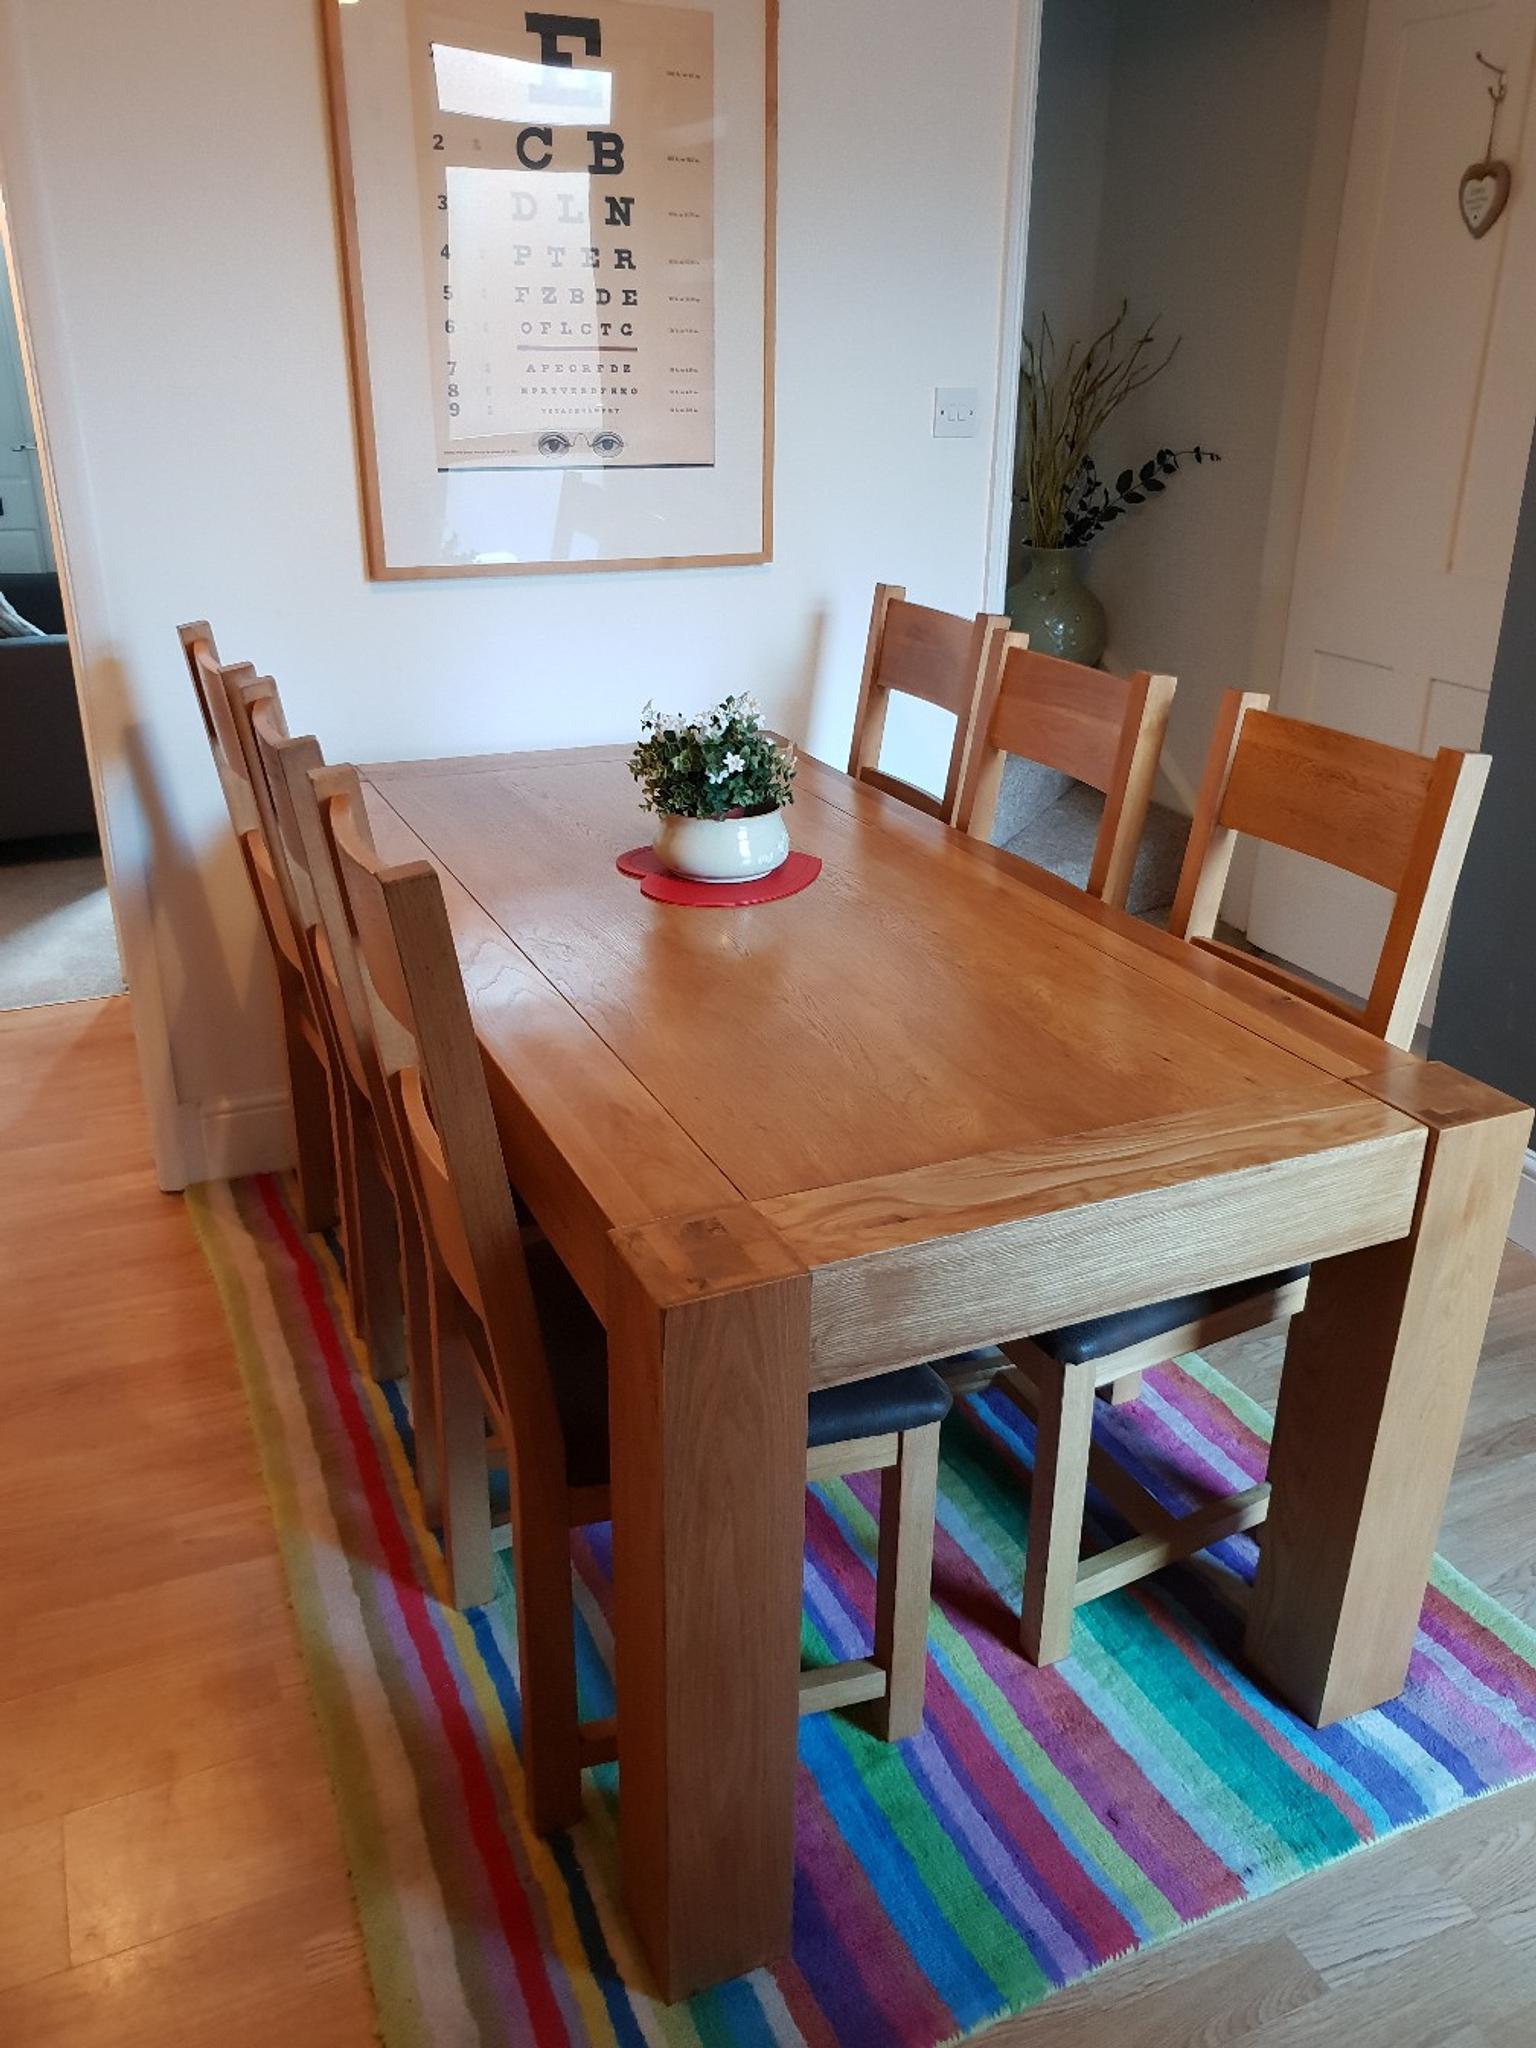 Solid Oak Dfs Dining Table And 6 Chairs In Le11 Charnwood Fur 225 00 Zum Verkauf Shpock De